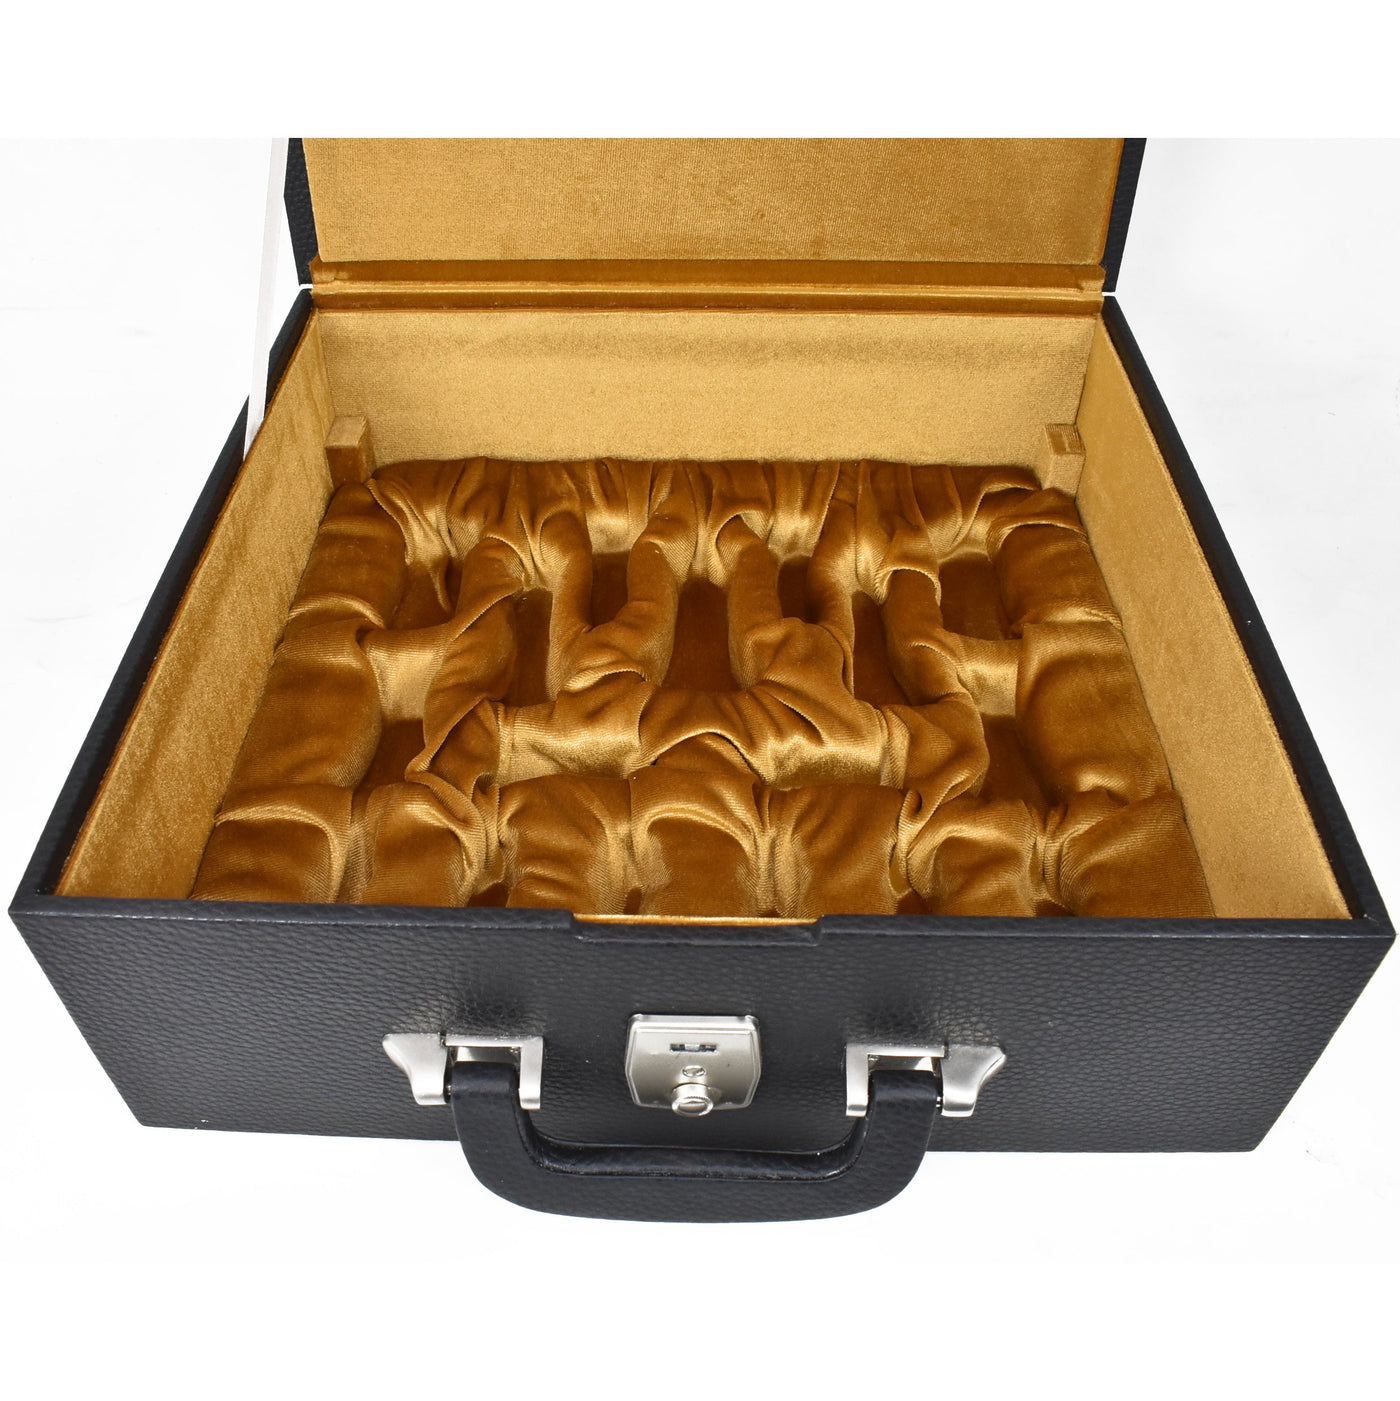 Combo of 4.1" Pro Staunton Chess Set - Pieces in Black & White Lacquered Boxwood with 23" Ebony & Maple Wood Chessboard and Storage Box